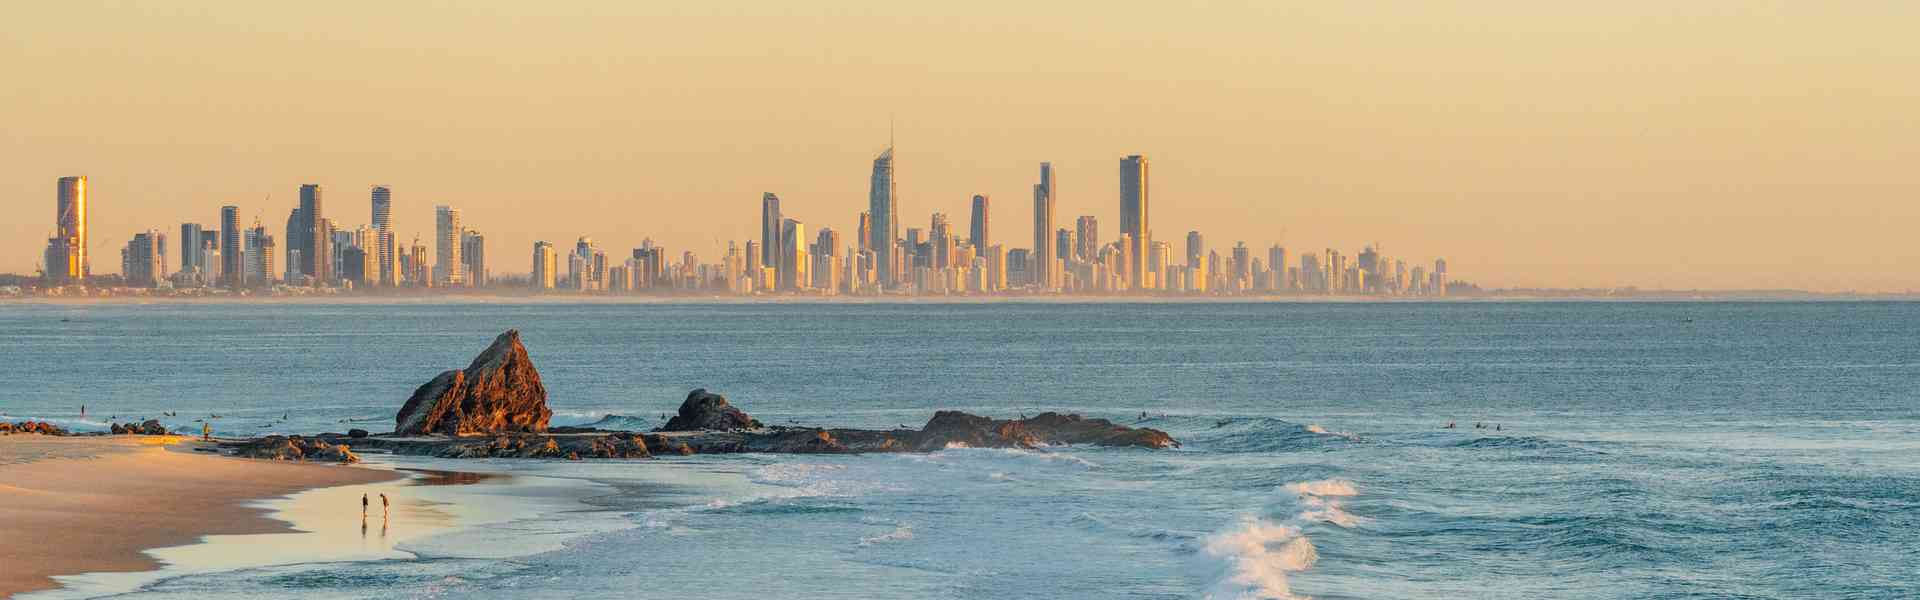 Top 11 Spots To Catch a Gold Coast Sunrise or Sunset